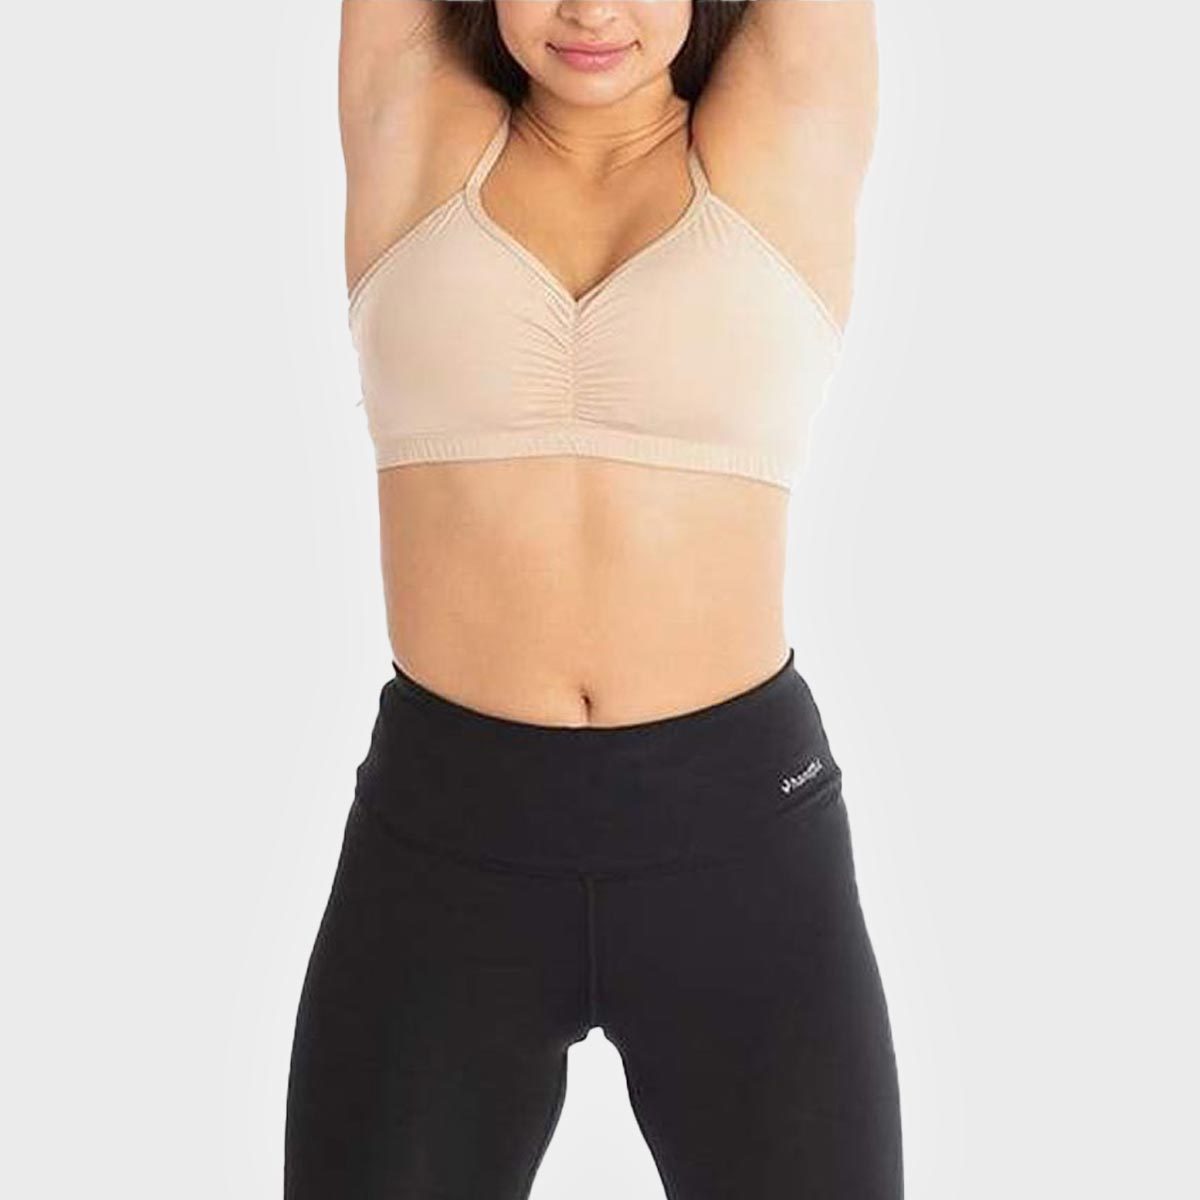 The Best Women's Activewear at Every Price Point: Leggings, Sports Bras